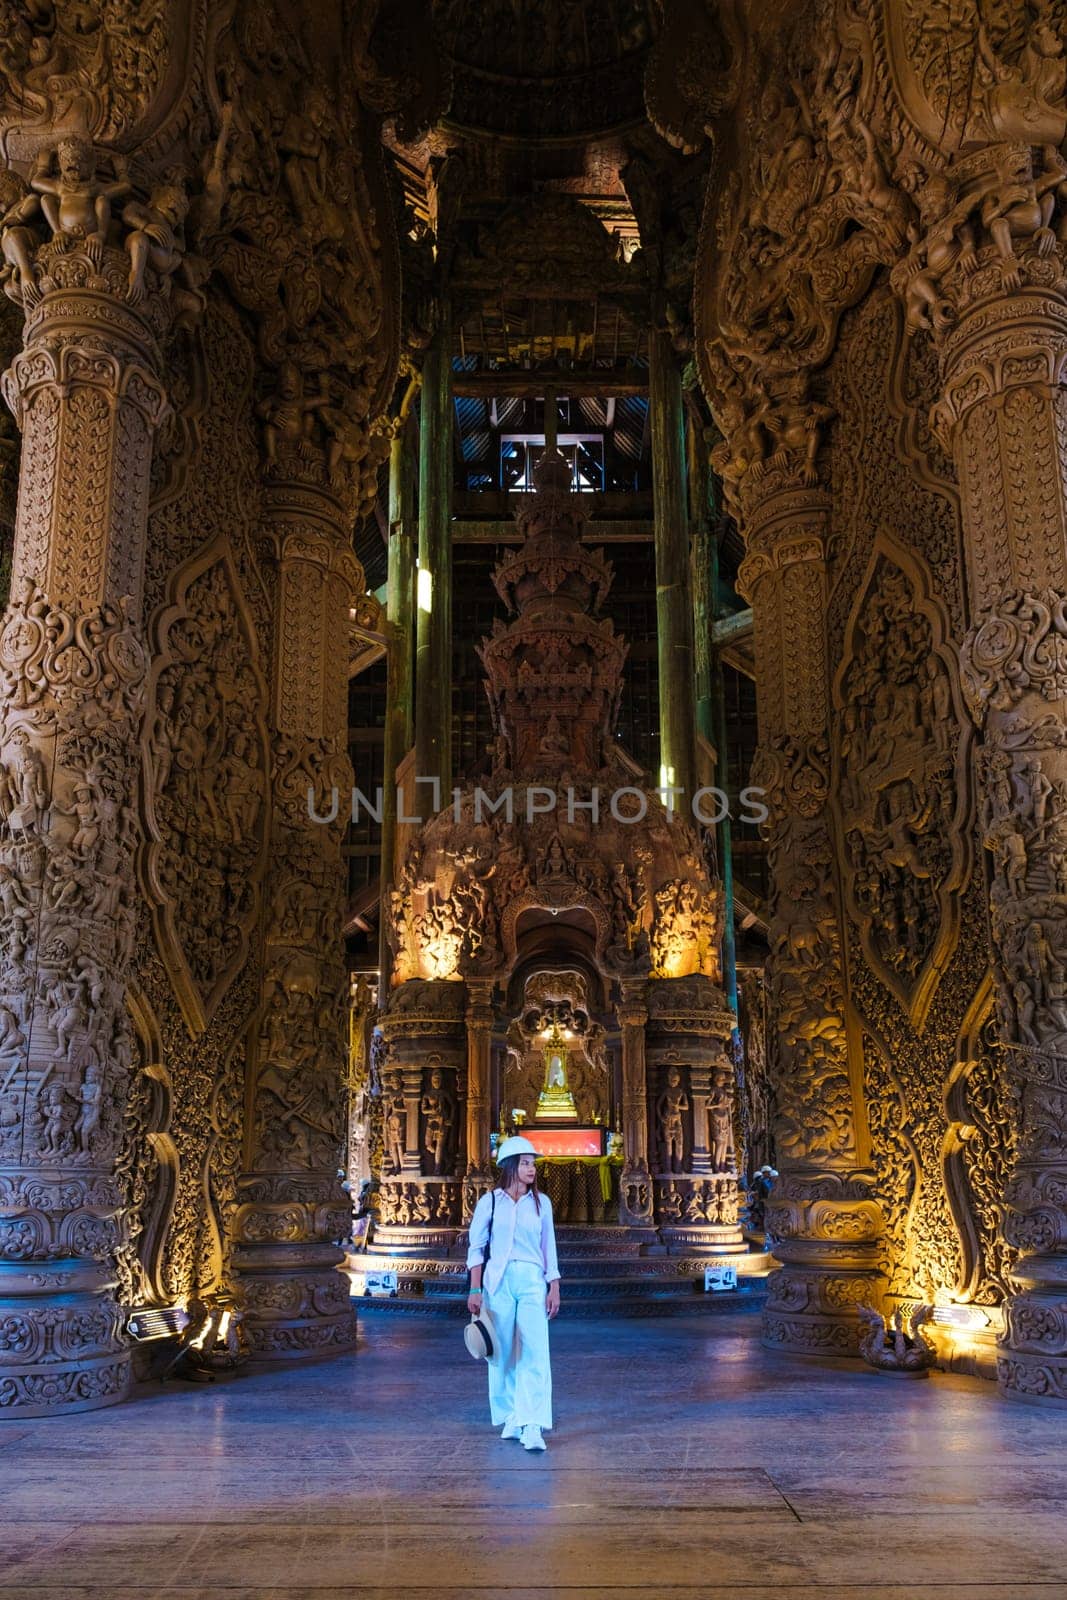 Asian women visit The Sanctuary of Truth wooden temple in Pattaya Thailand, sculpture of Sanctuary of Truth temple.